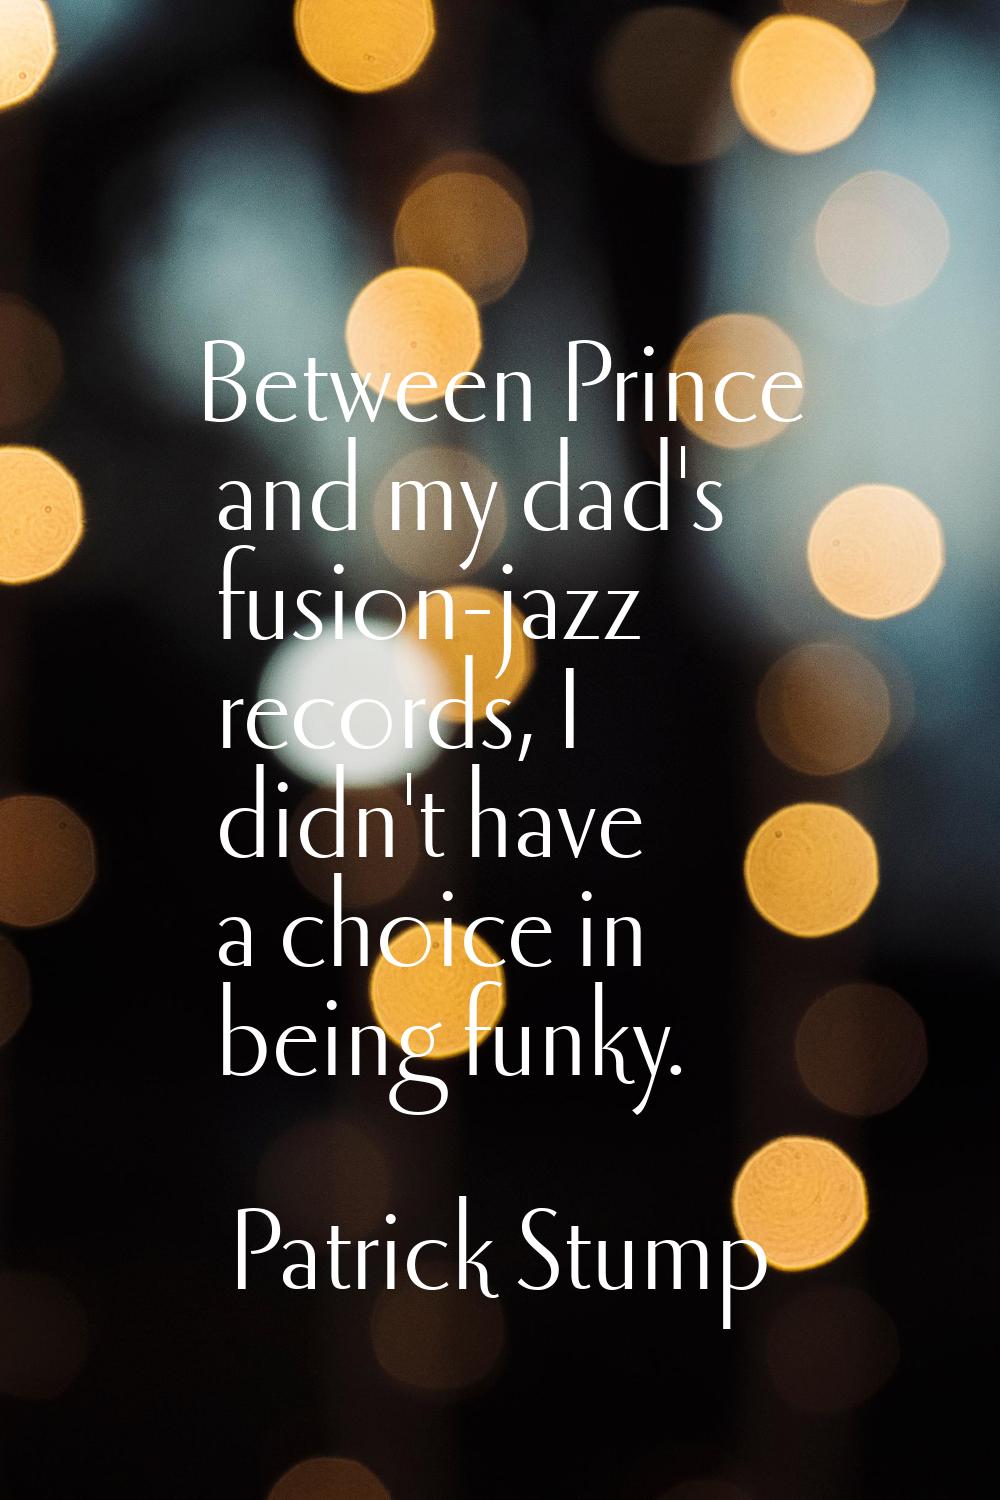 Between Prince and my dad's fusion-jazz records, I didn't have a choice in being funky.